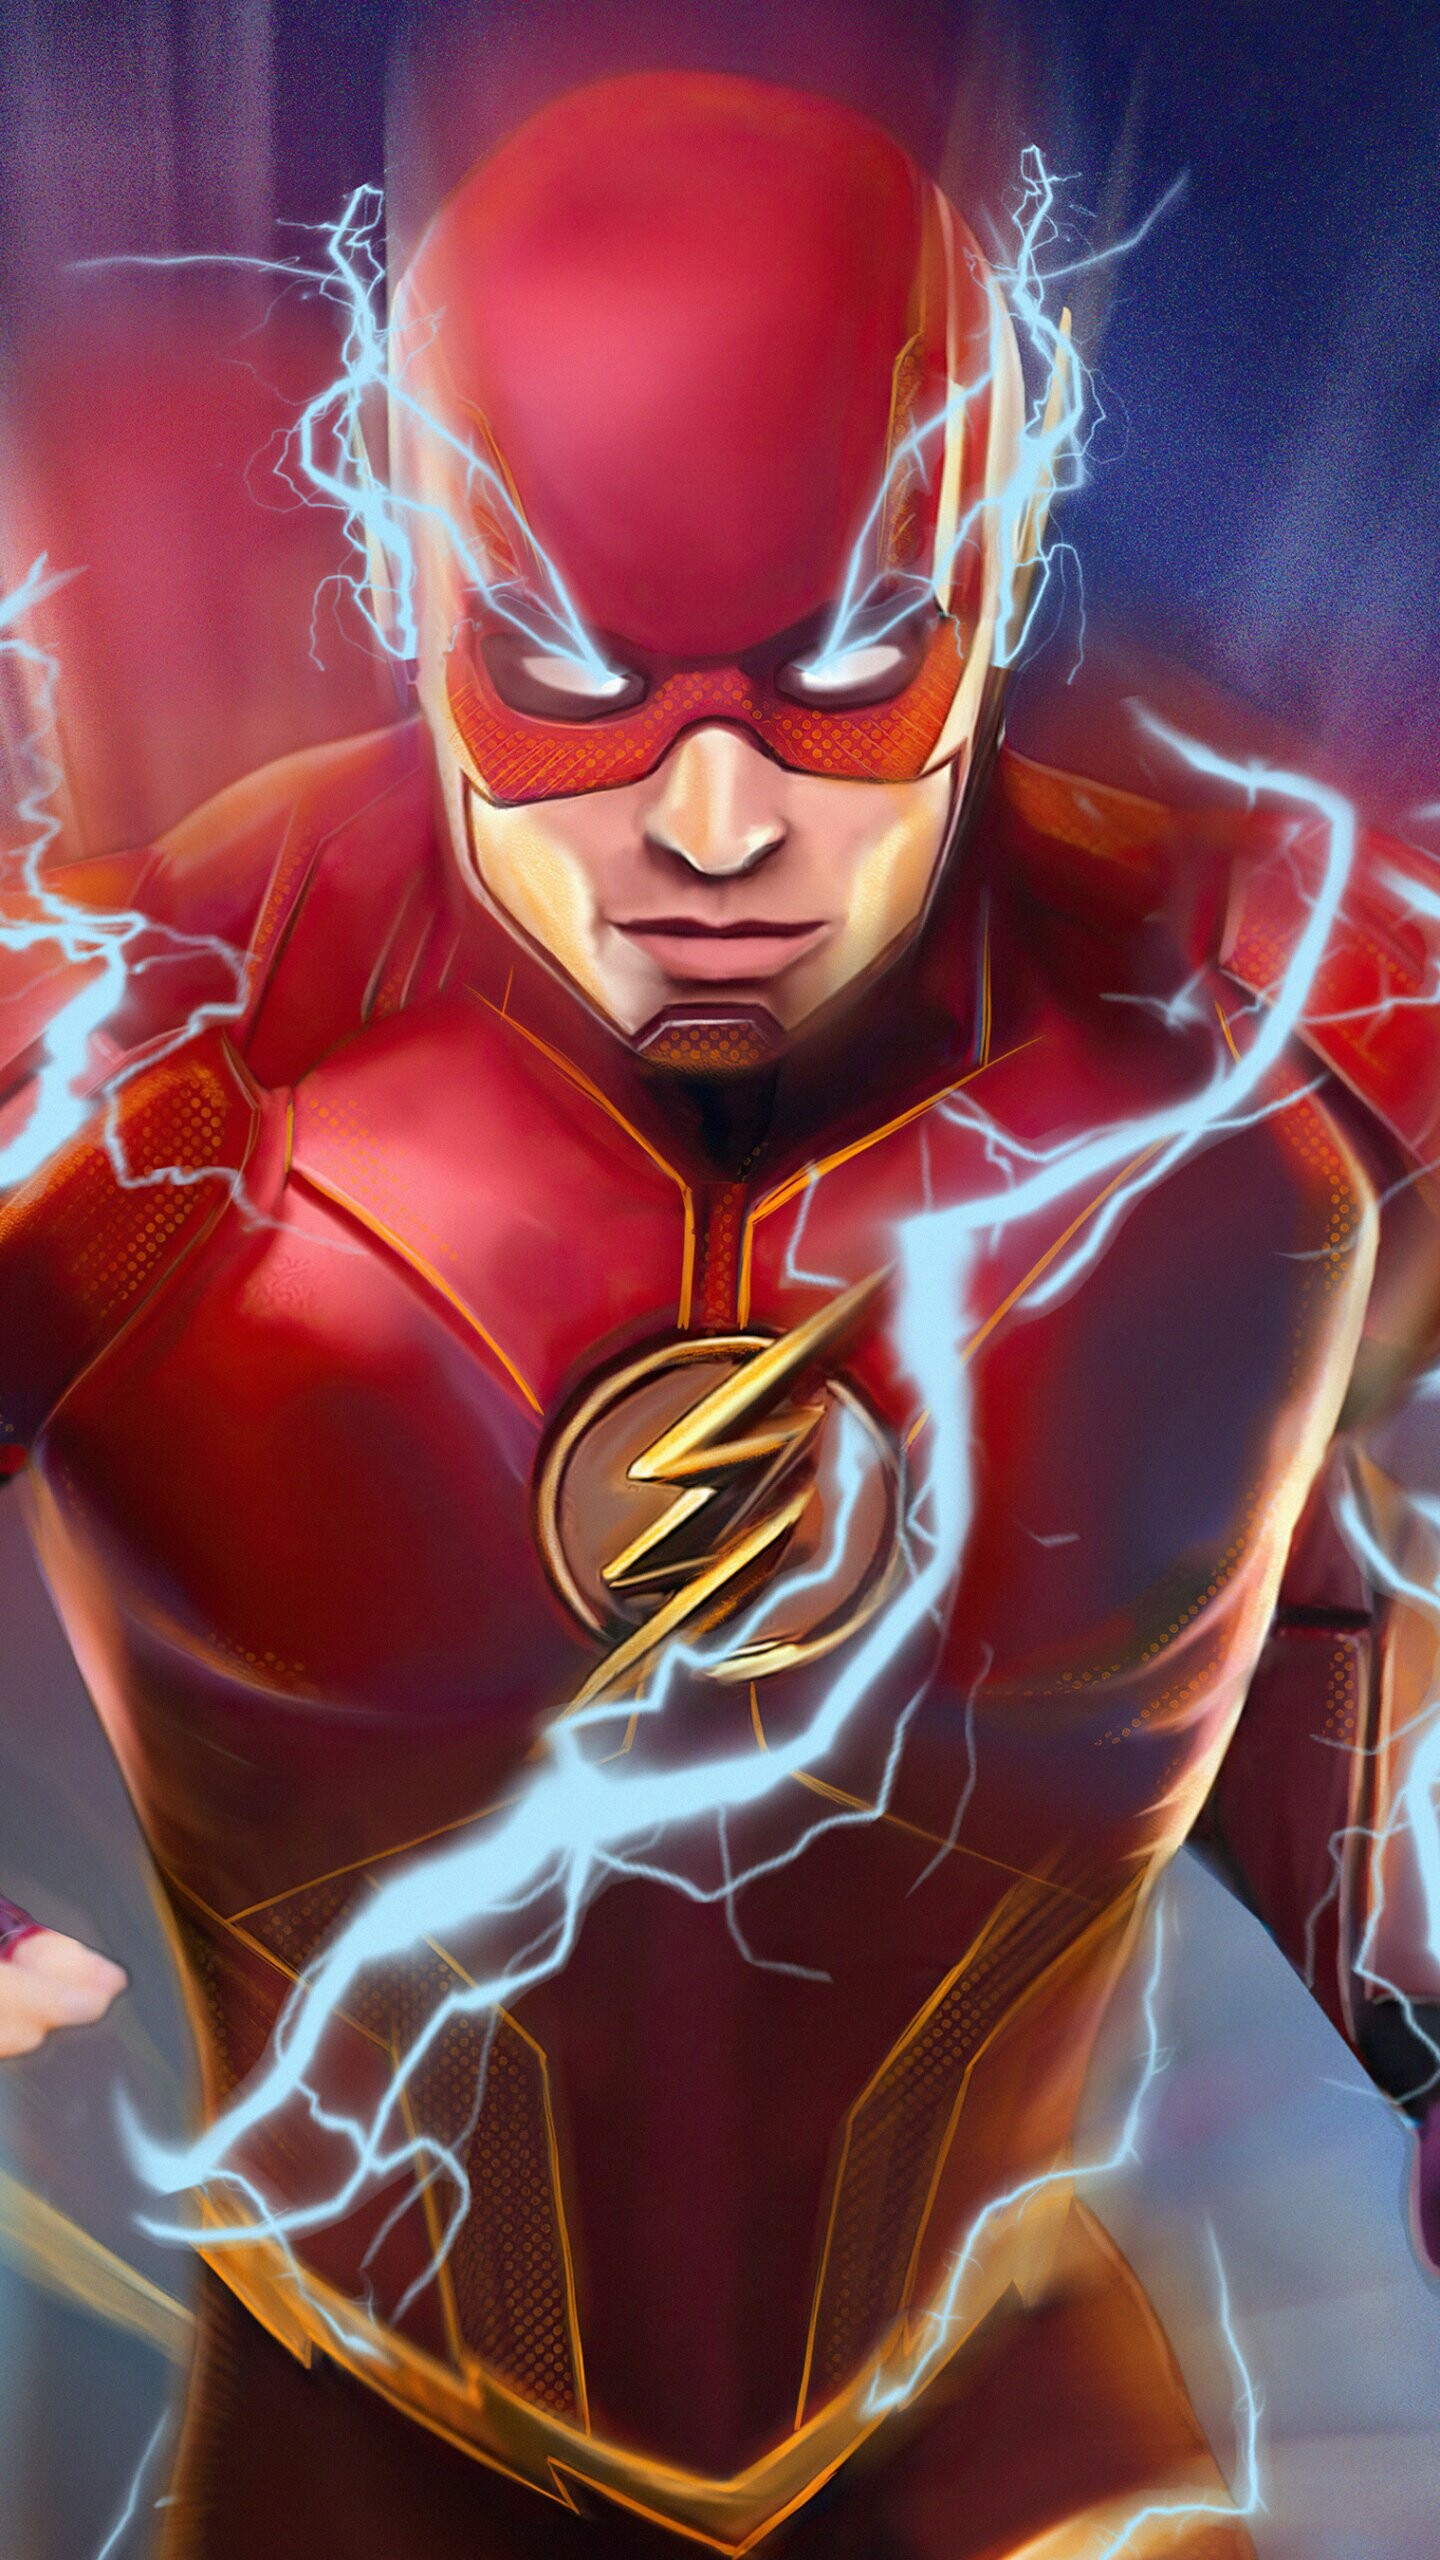 Flash (DC): A character fighting against evil using his super-speed, Comics. 1440x2560 HD Wallpaper.